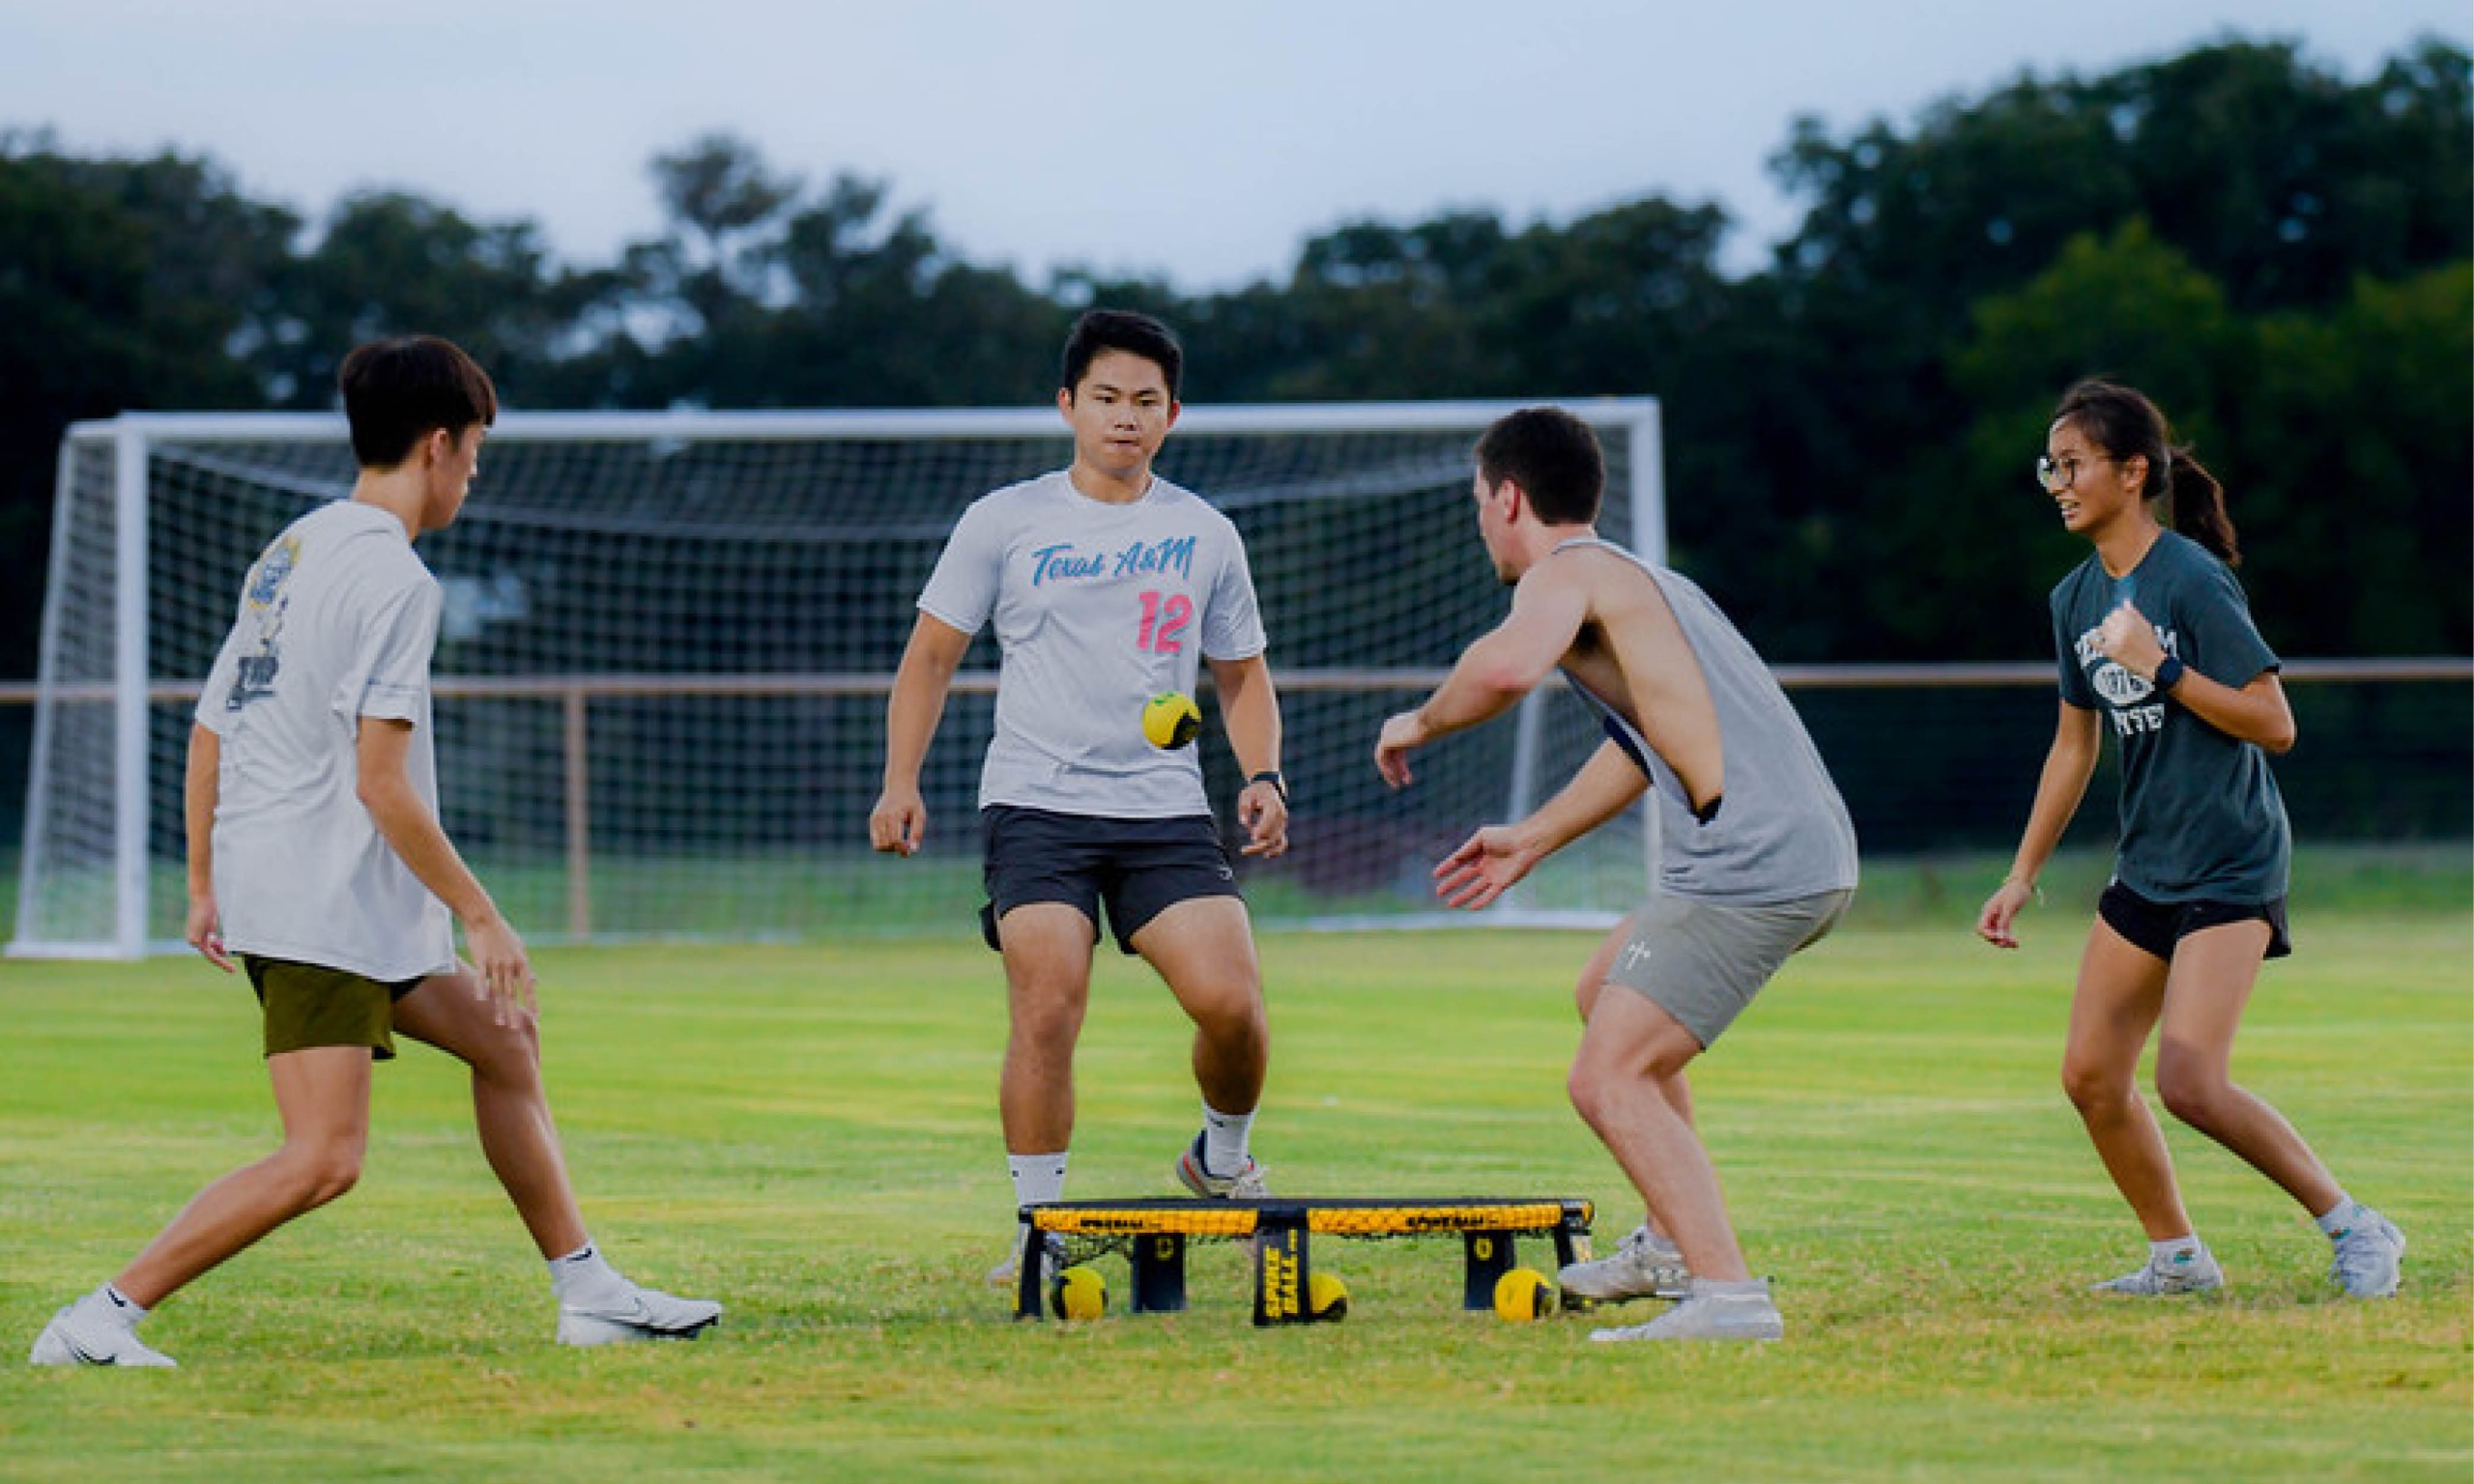 Four young men playing spikeball on a field, displaying teamwork, agility, and passion for the game.